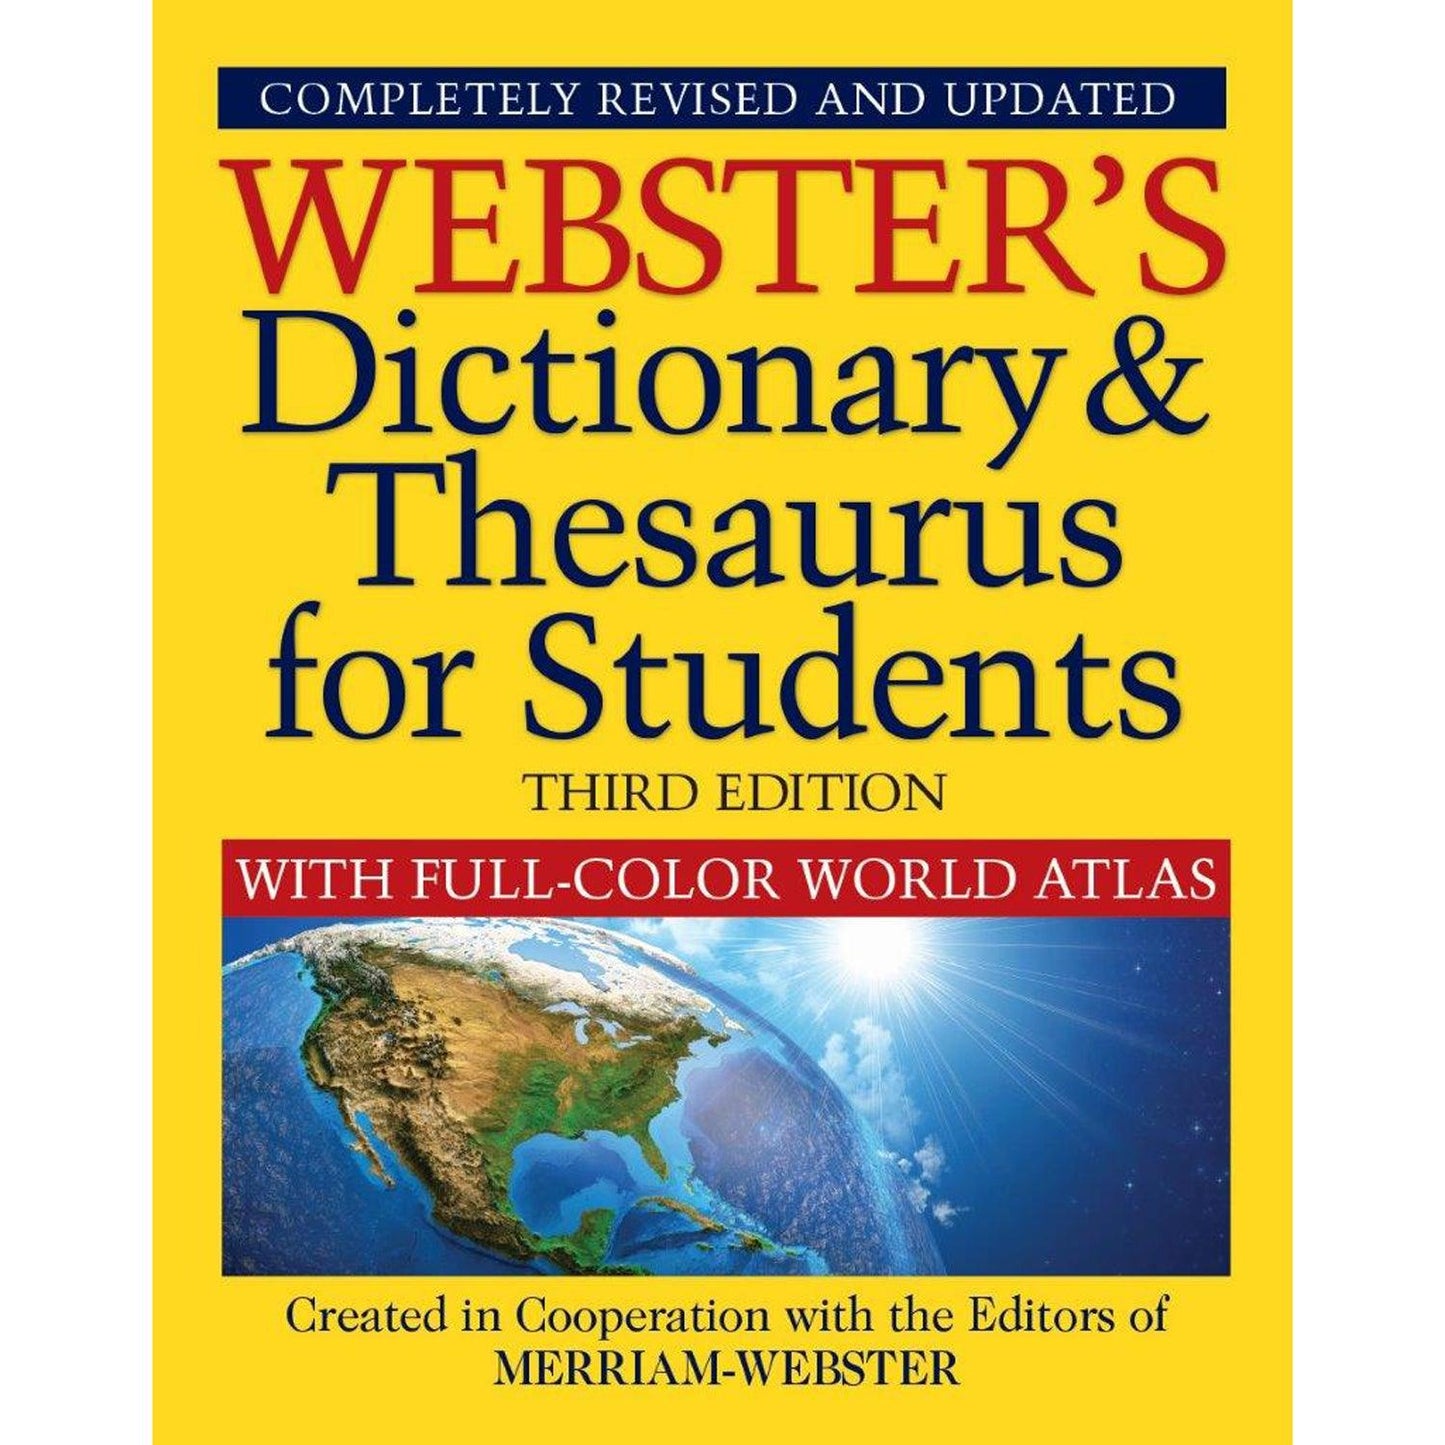 Dictionary & Thesaurus with Full Color World Atlas, Third Edition - Loomini